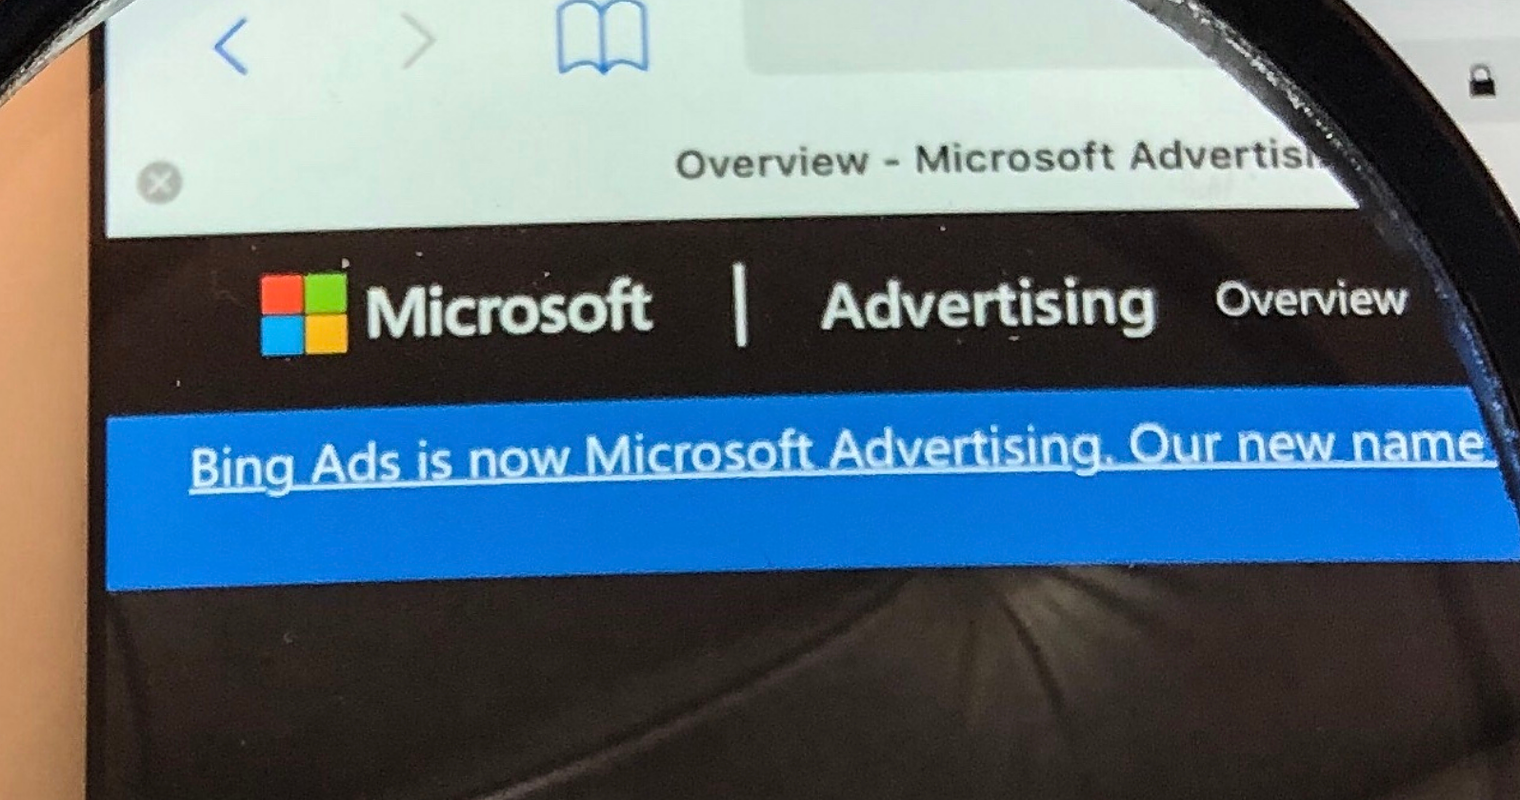 Microsoft Advertising Offers Clearer Data on Ad Positions in Search Results